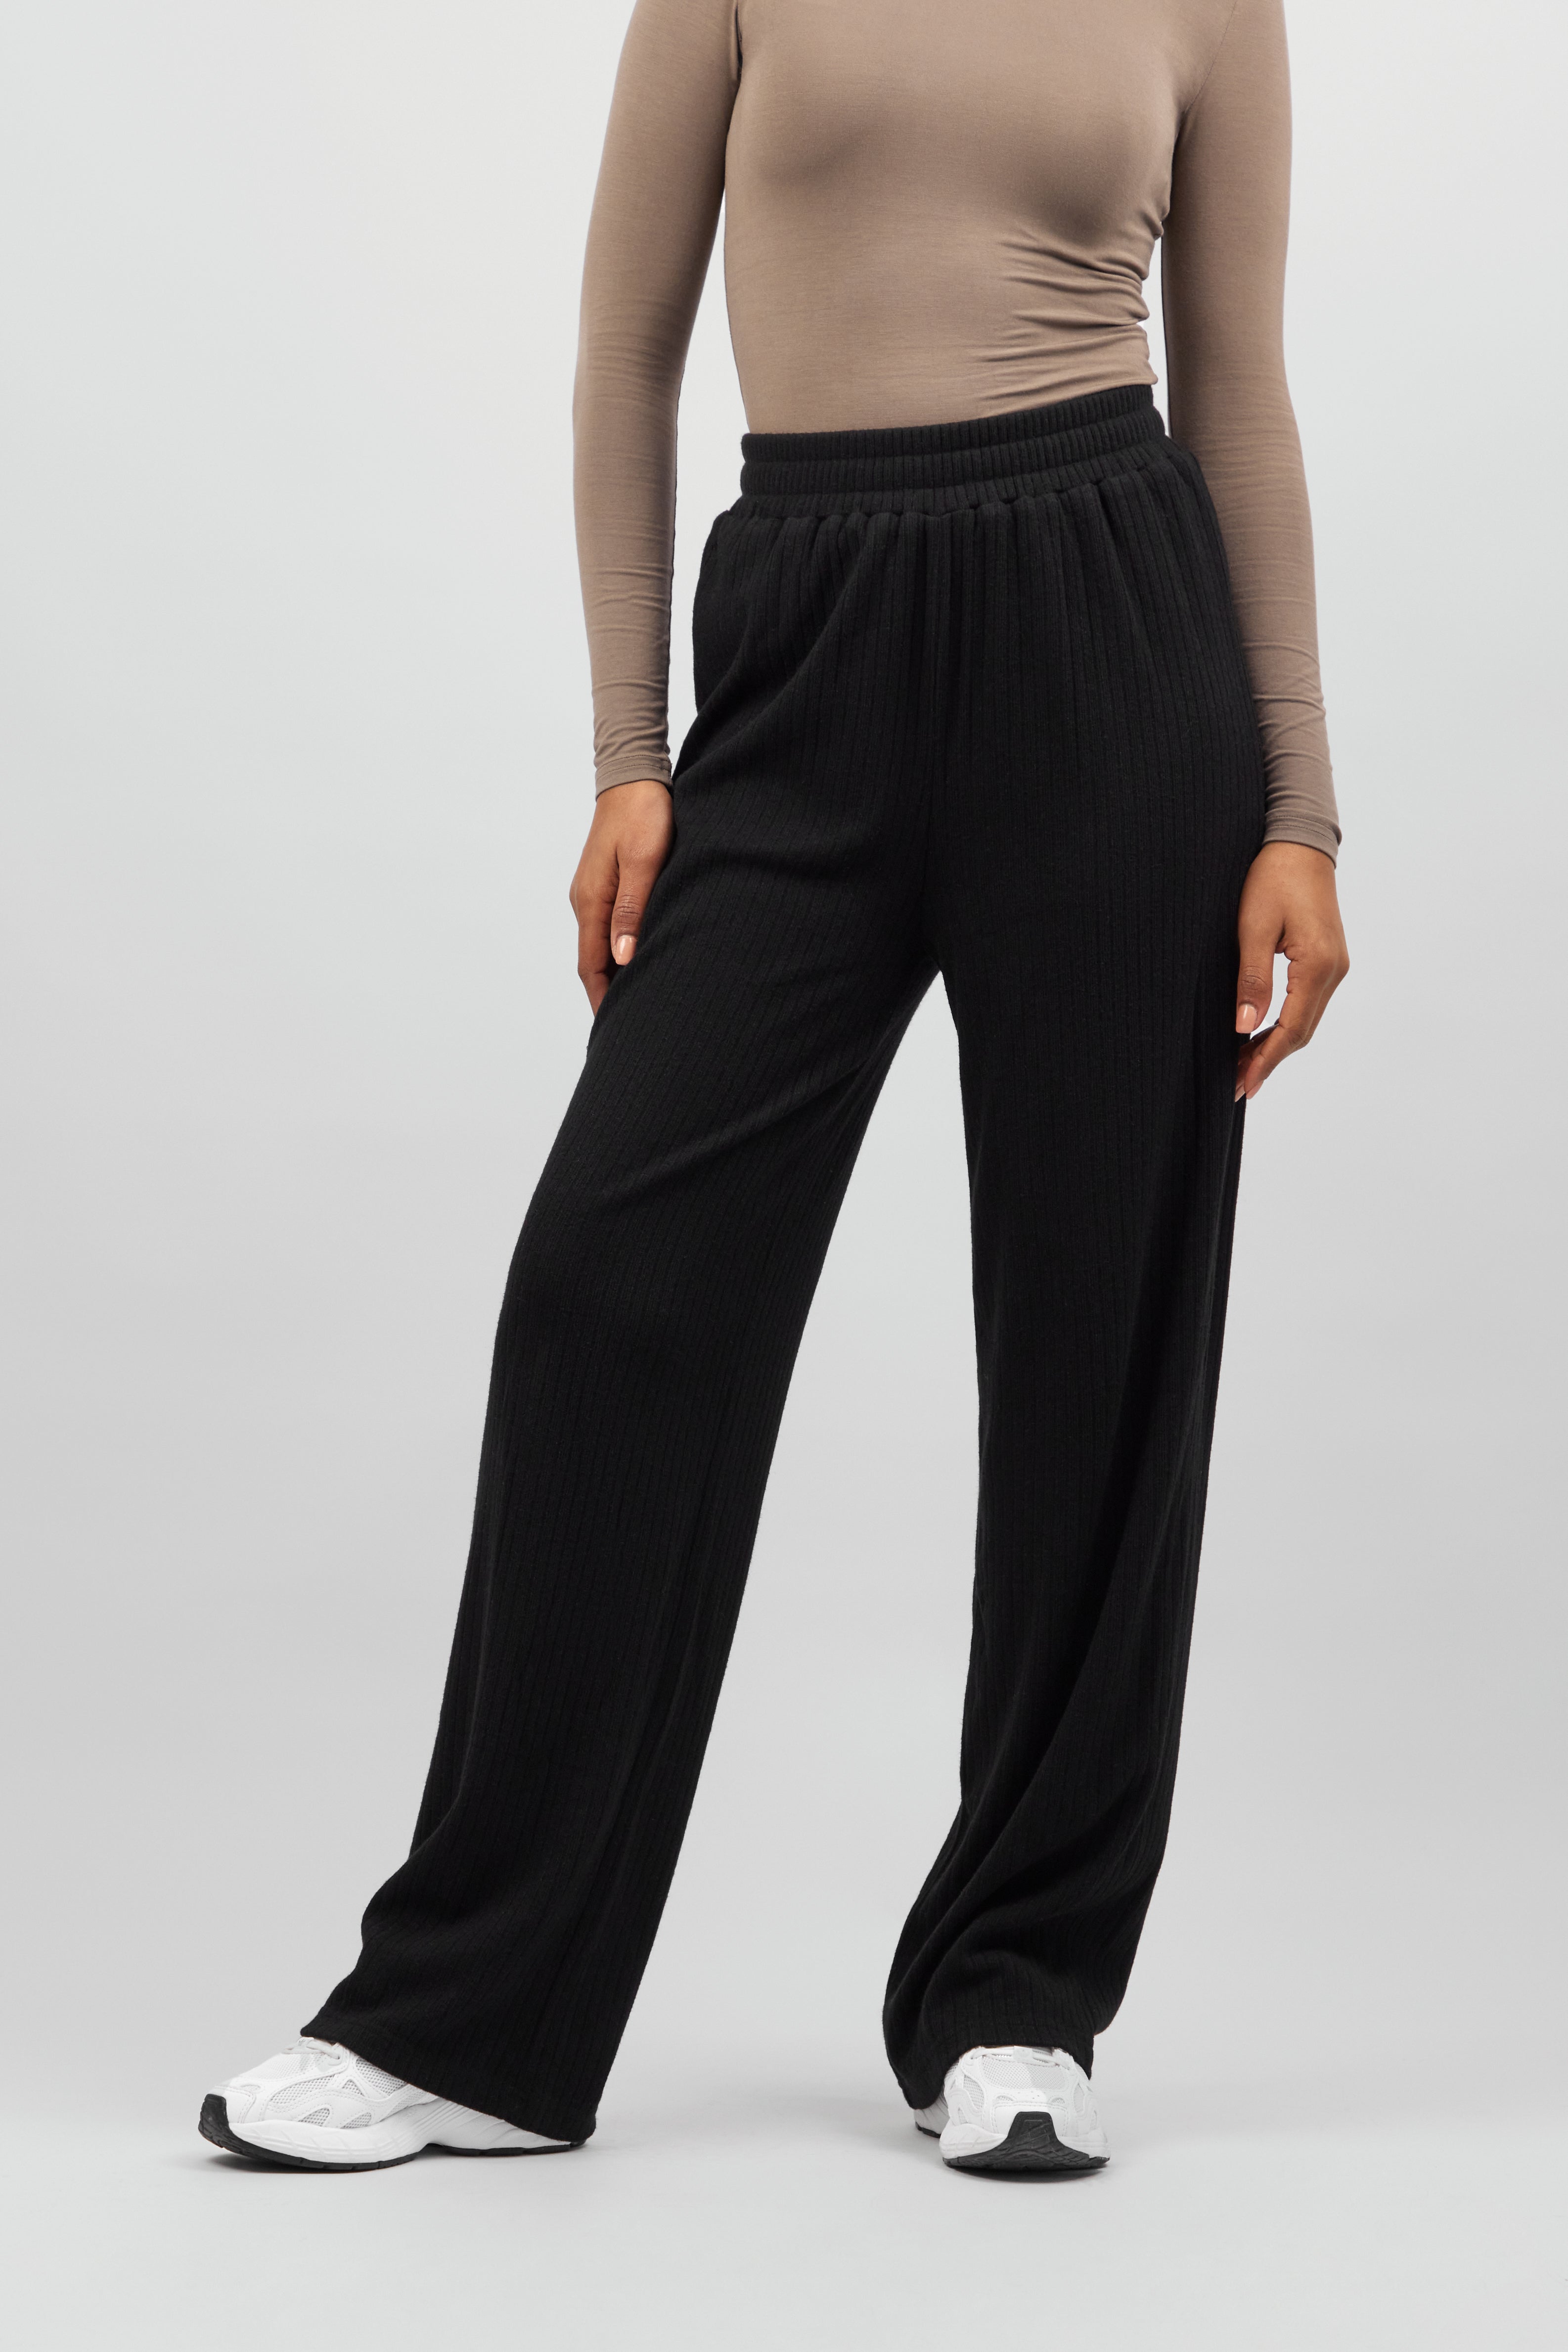 US - Knit Relaxed Fit Pants - Black